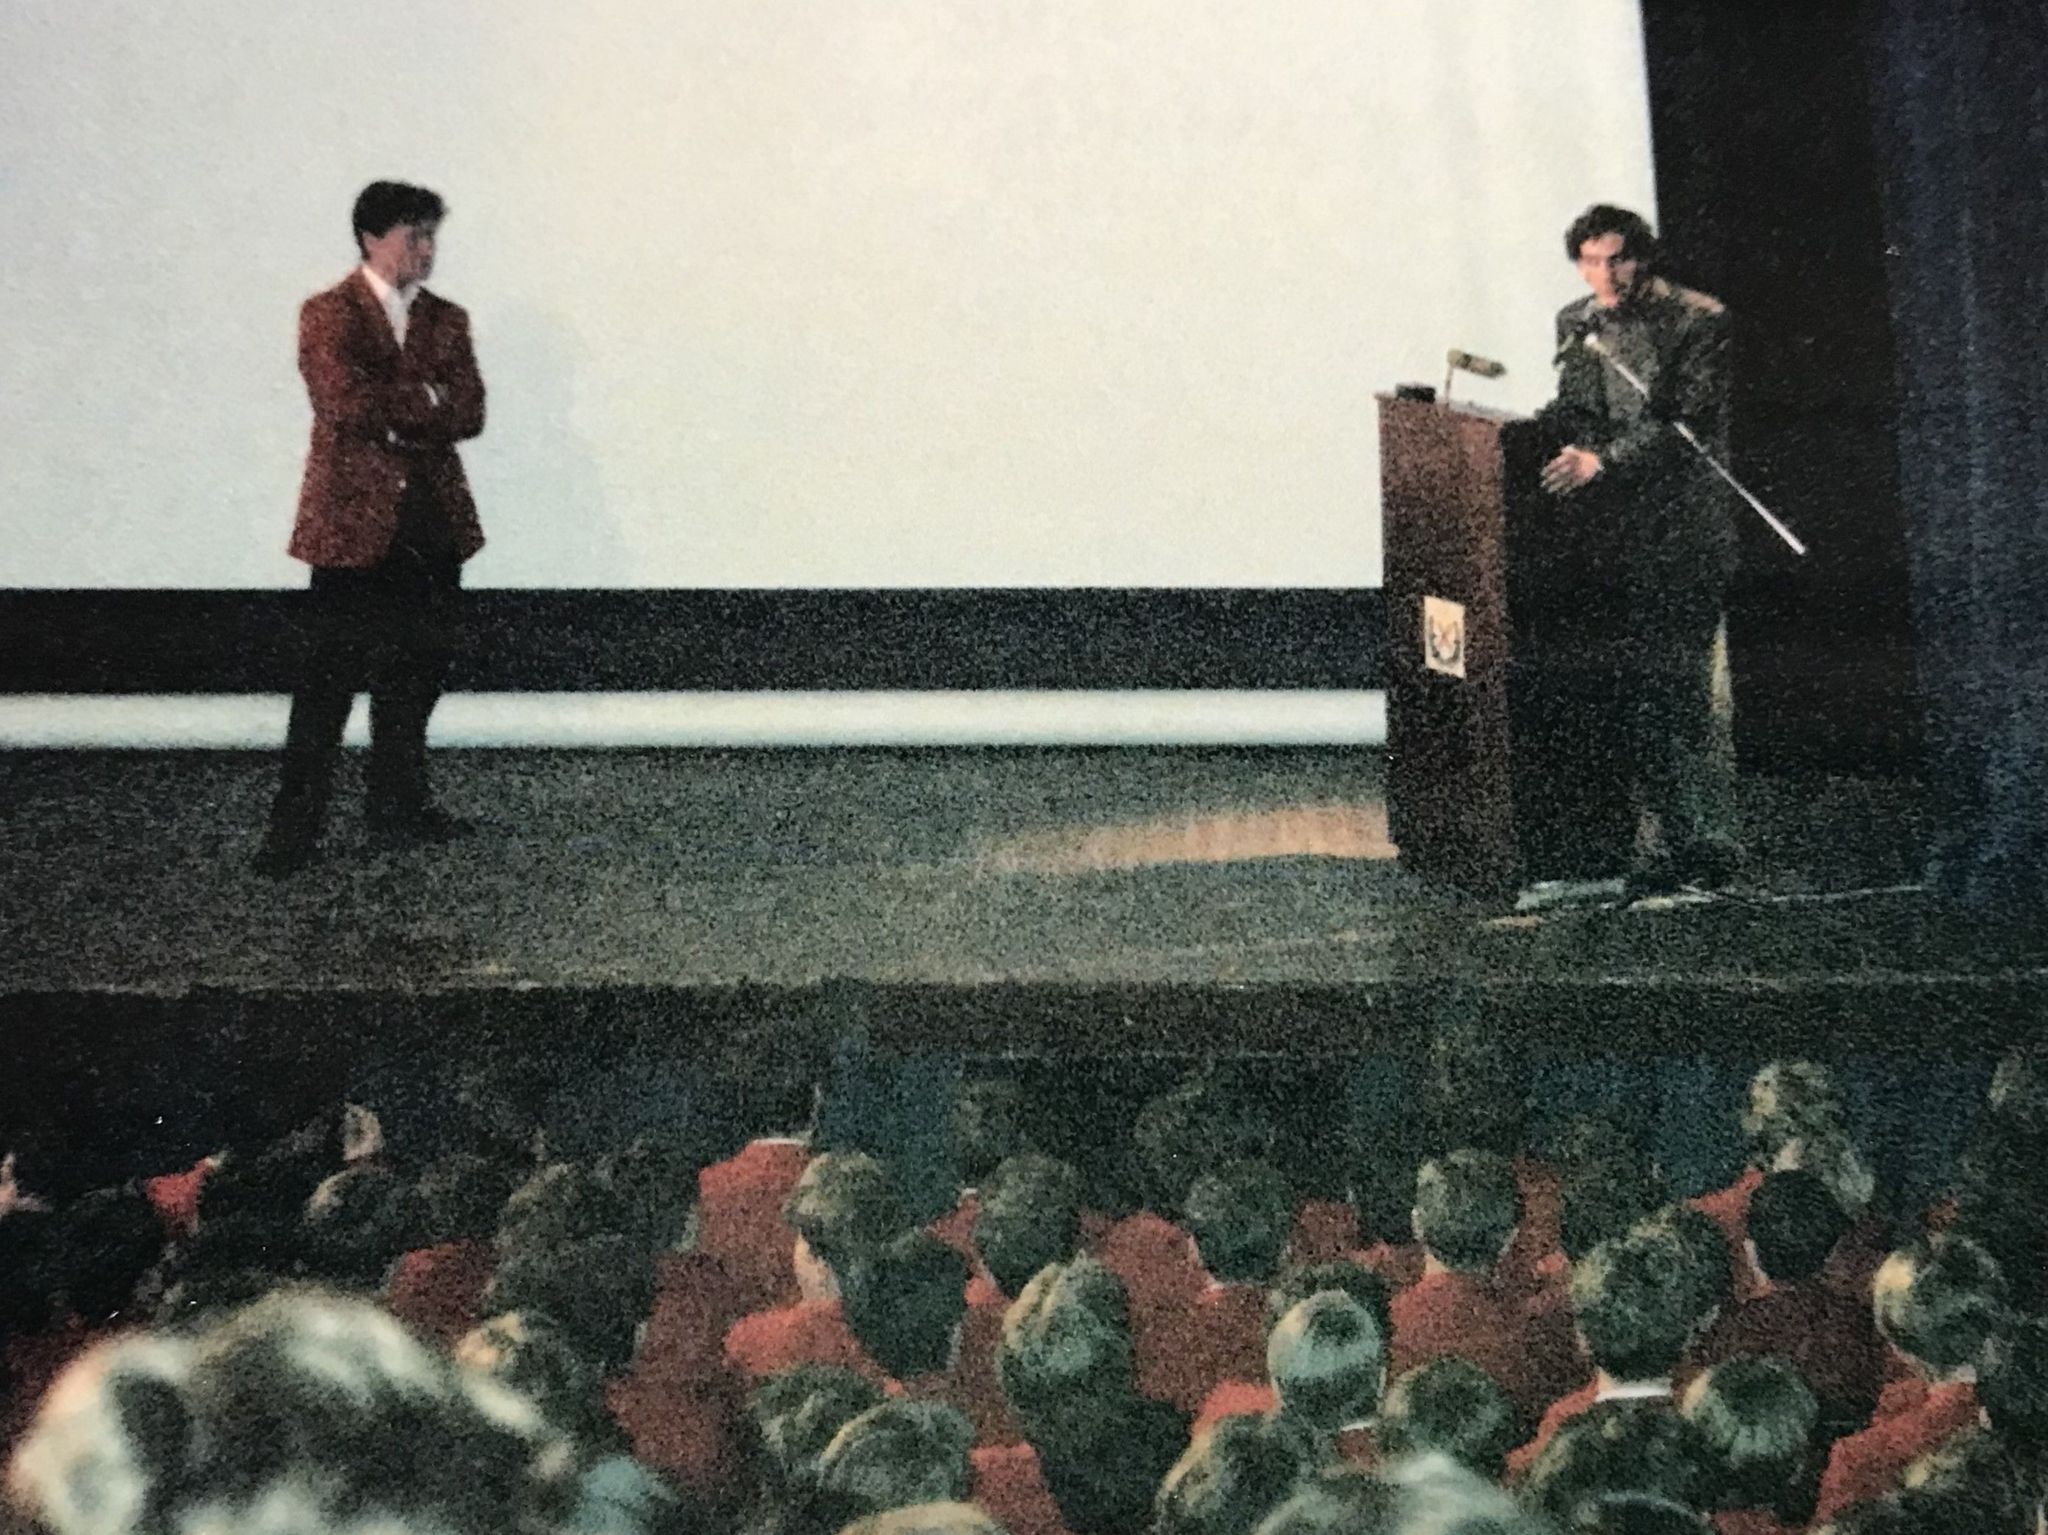 Aryton Senna speaks into a microphone while standing on stage in front of schoolchildren